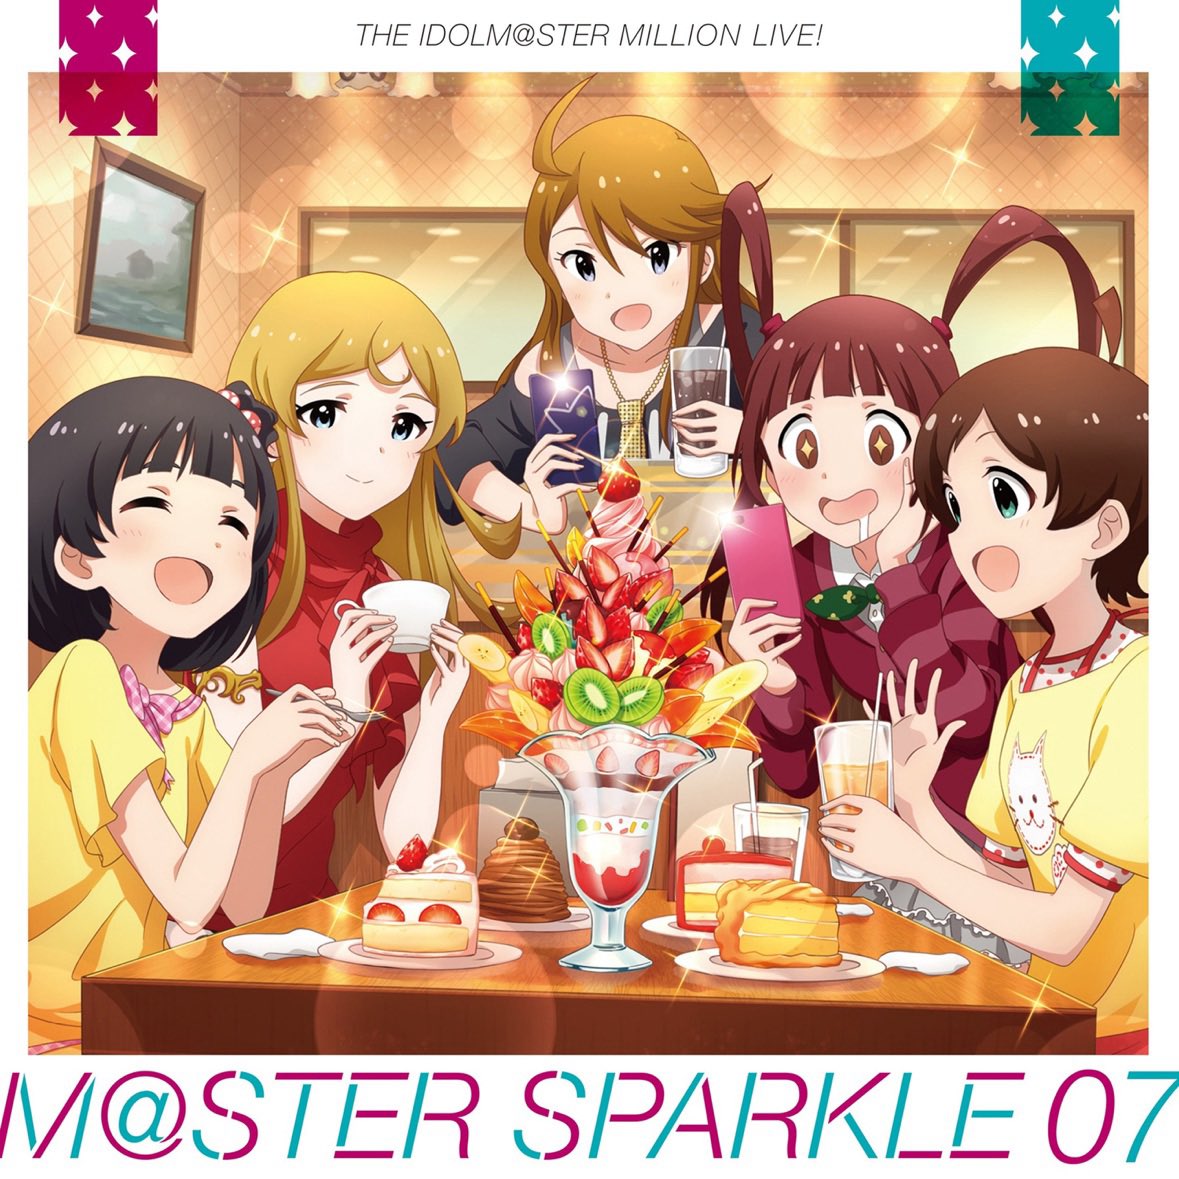 #nowplaying #odenplaying
Take!3.2.1.→S・P・A・C・E↑↑ - 松田亜利沙 (CV.村川梨衣) (THE IDOLM@STER MILLION LIVE! M@STER SPARKLE 07 - EP)